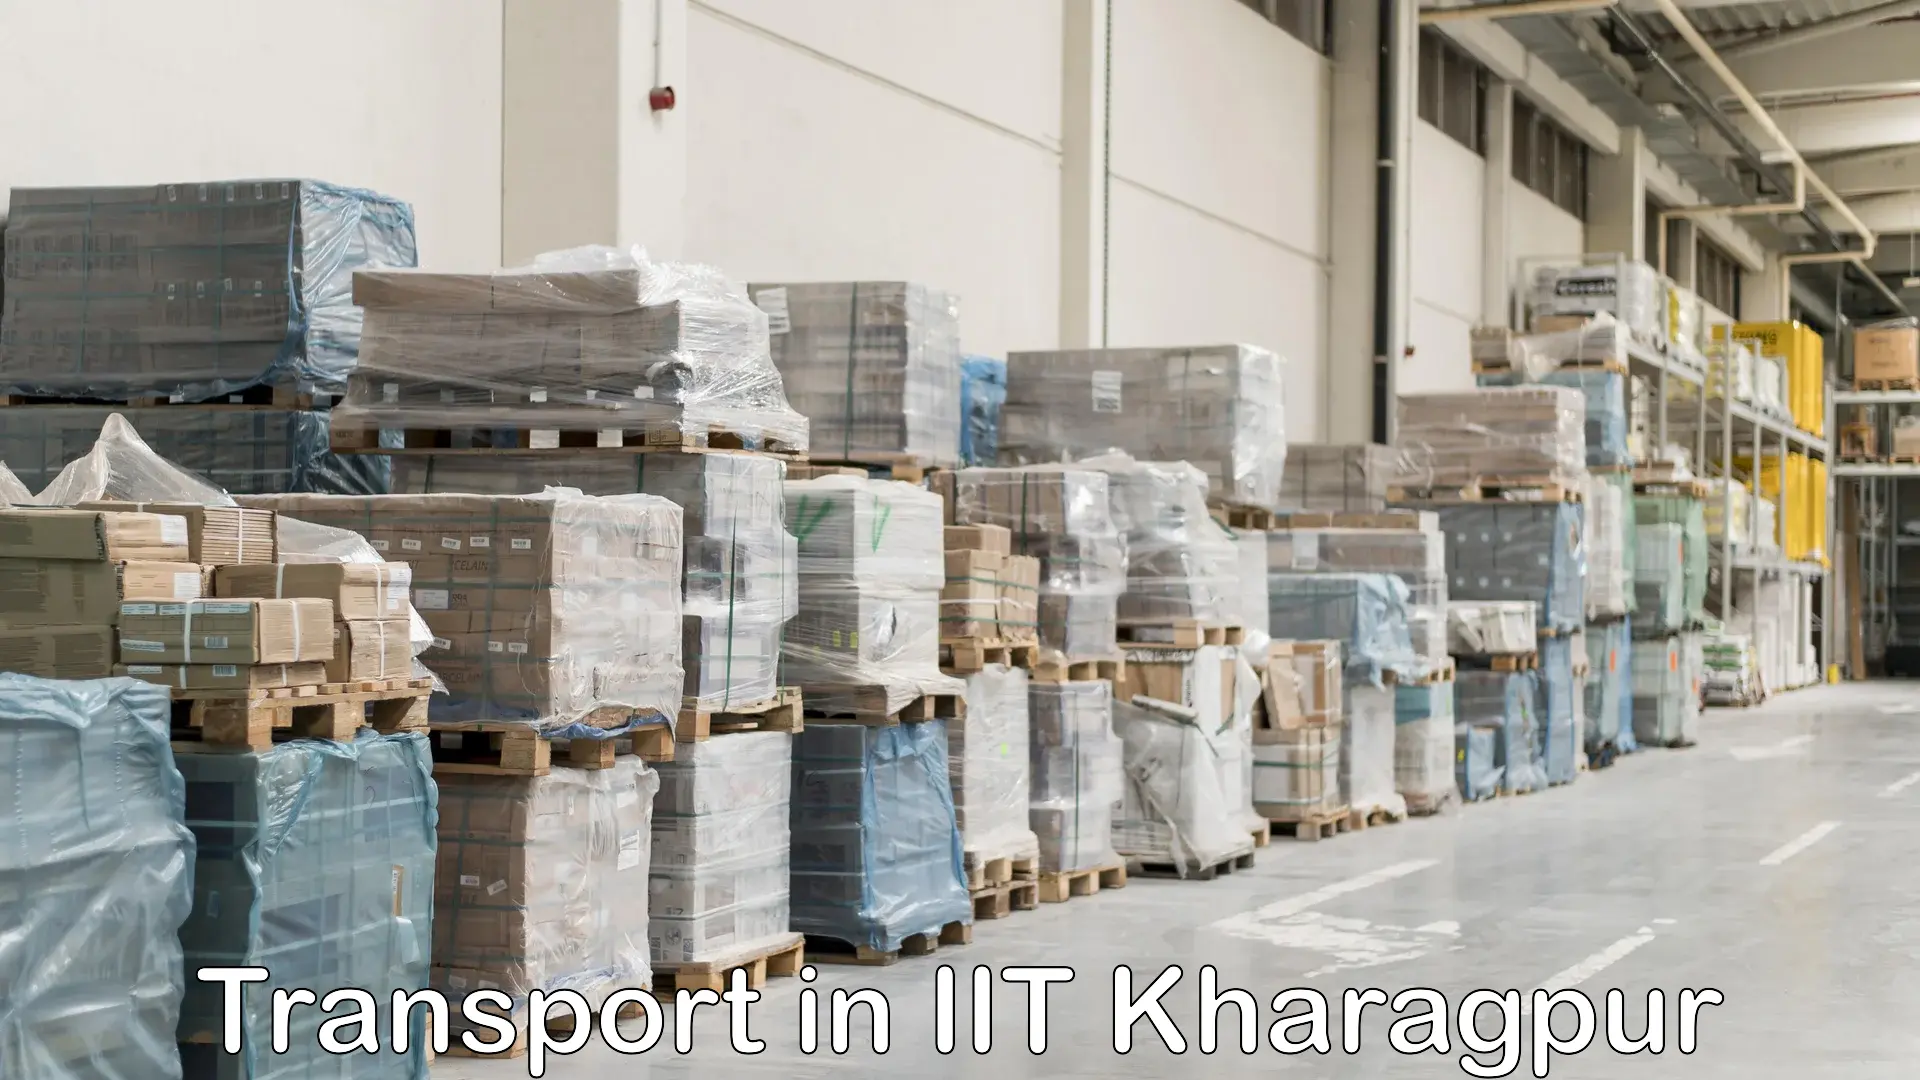 Domestic transport services in IIT Kharagpur